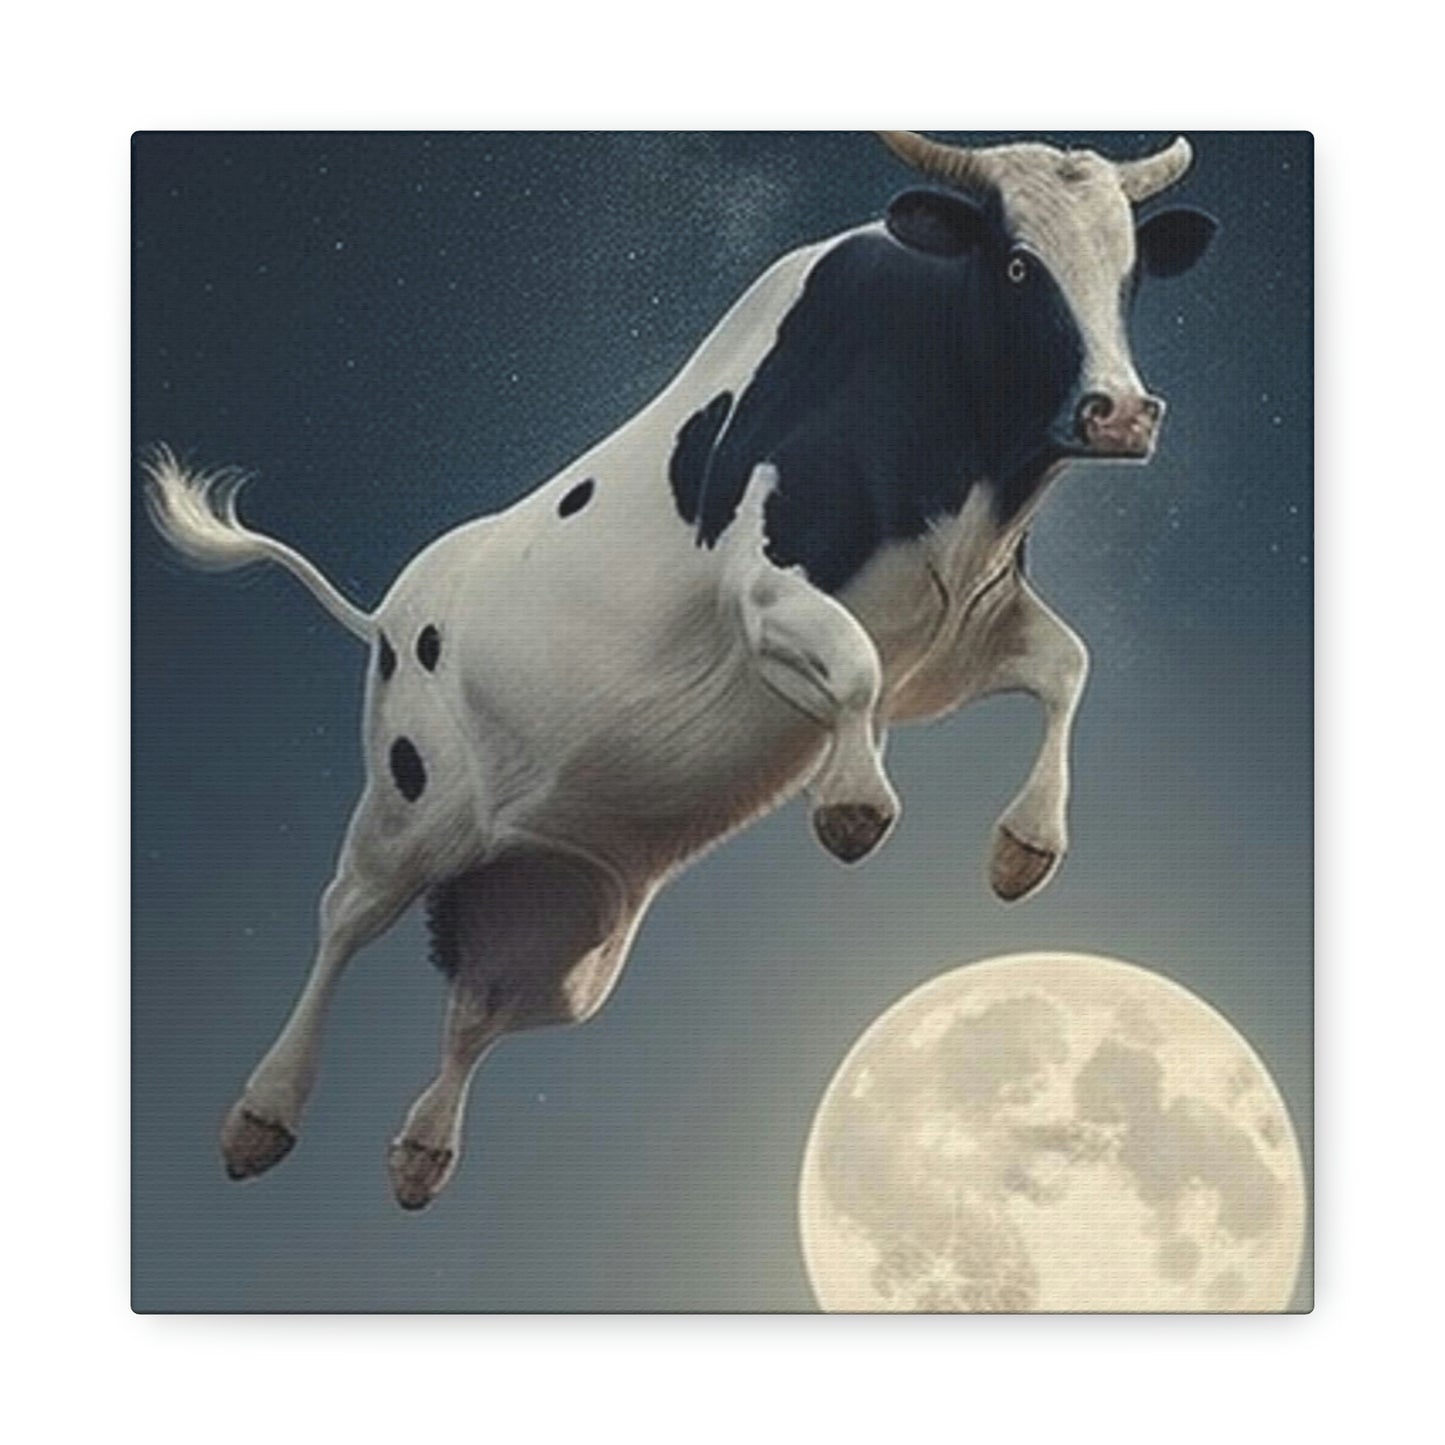 Cow jumping over the moon 2